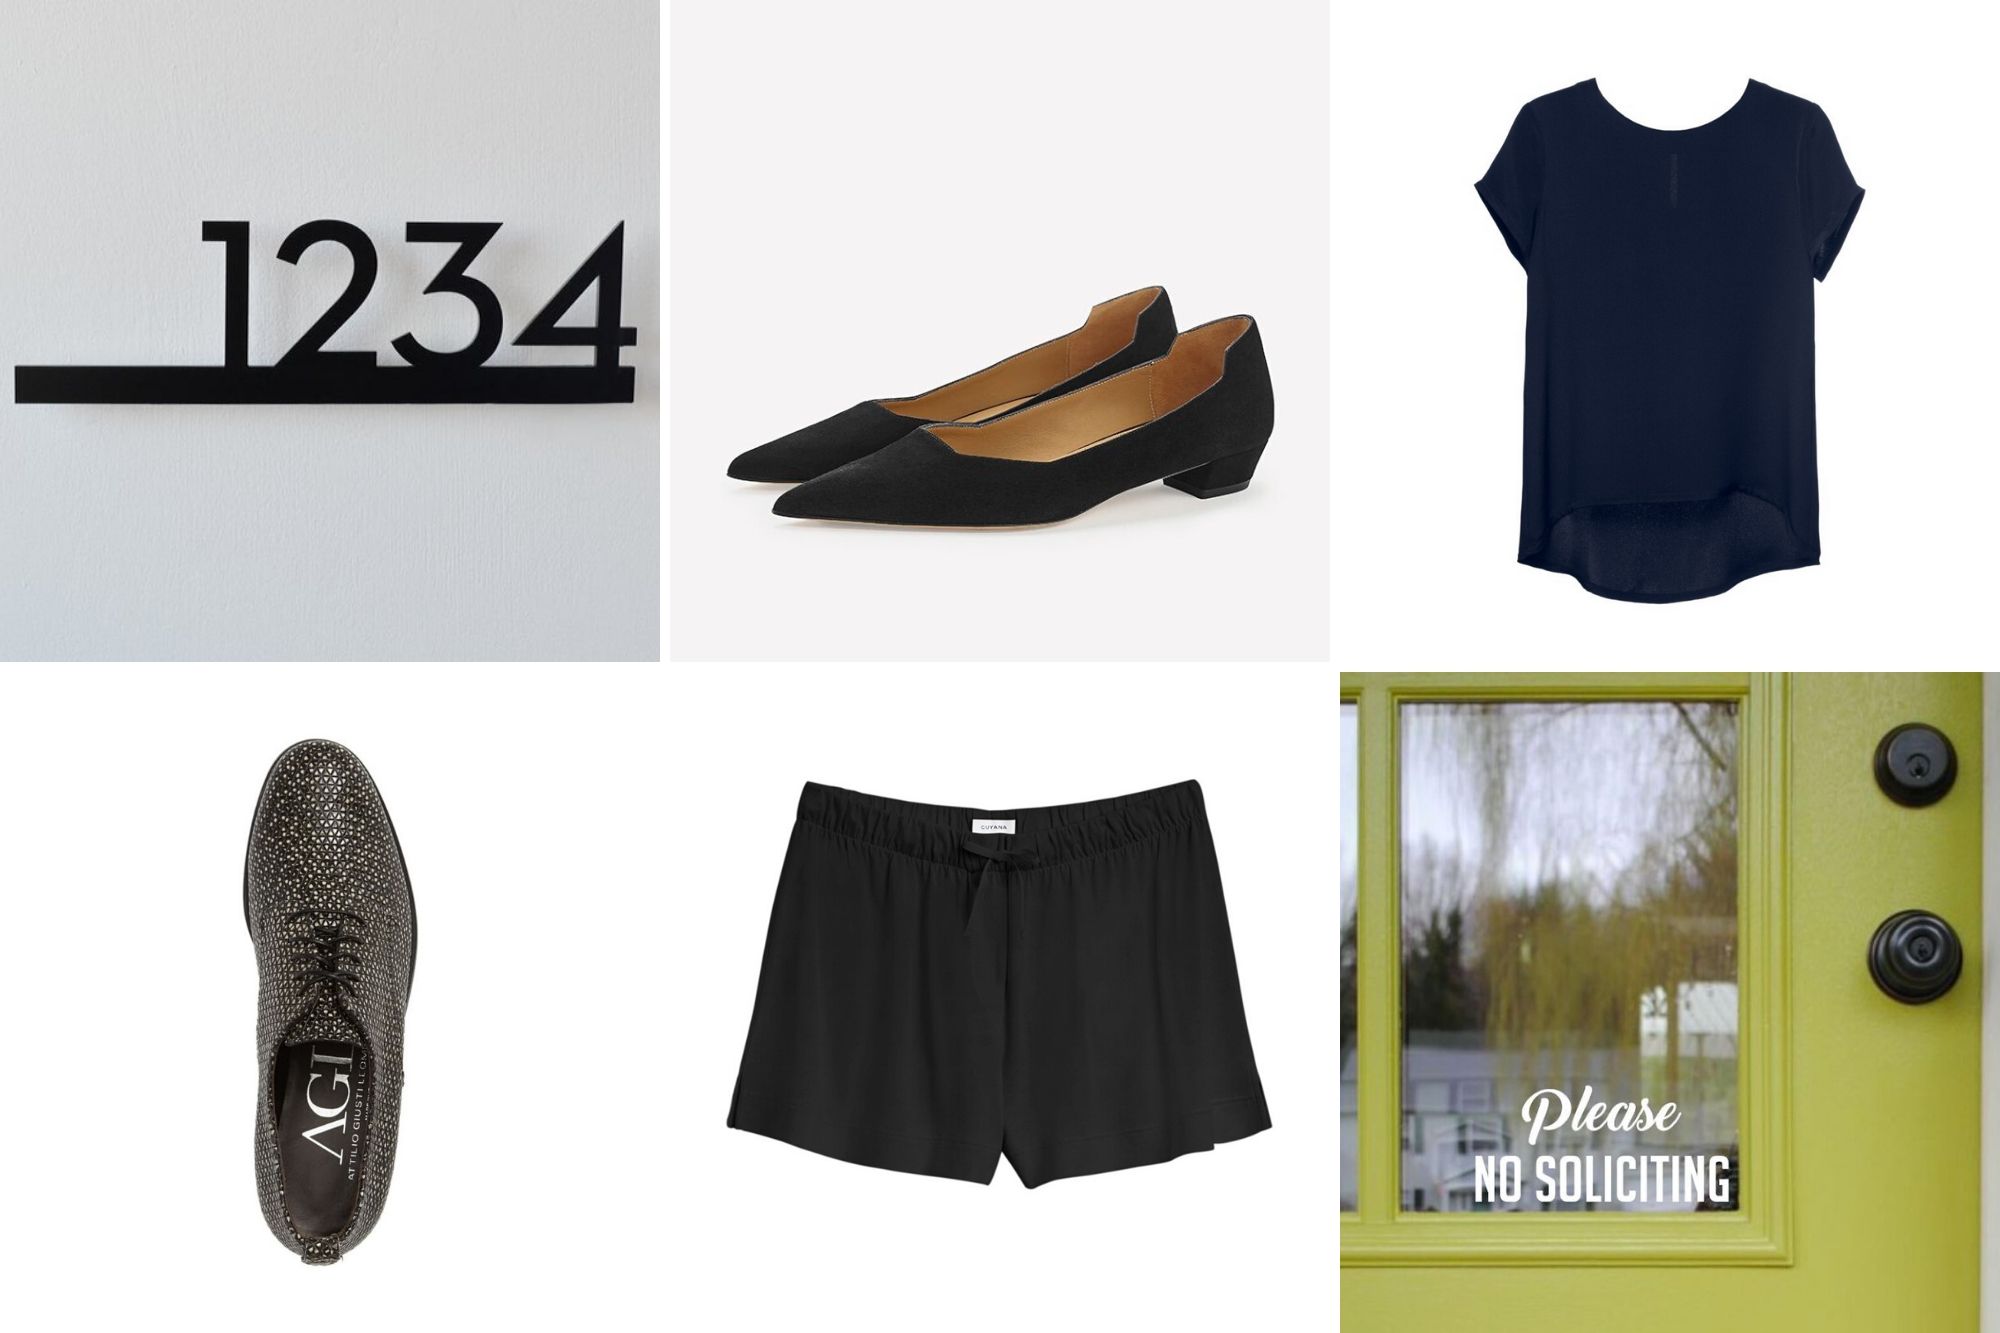 Collage: House numbers, black flat shoes, silk tee shirt, "please no soliciting" door decal, pima shorts, and oxford shoe